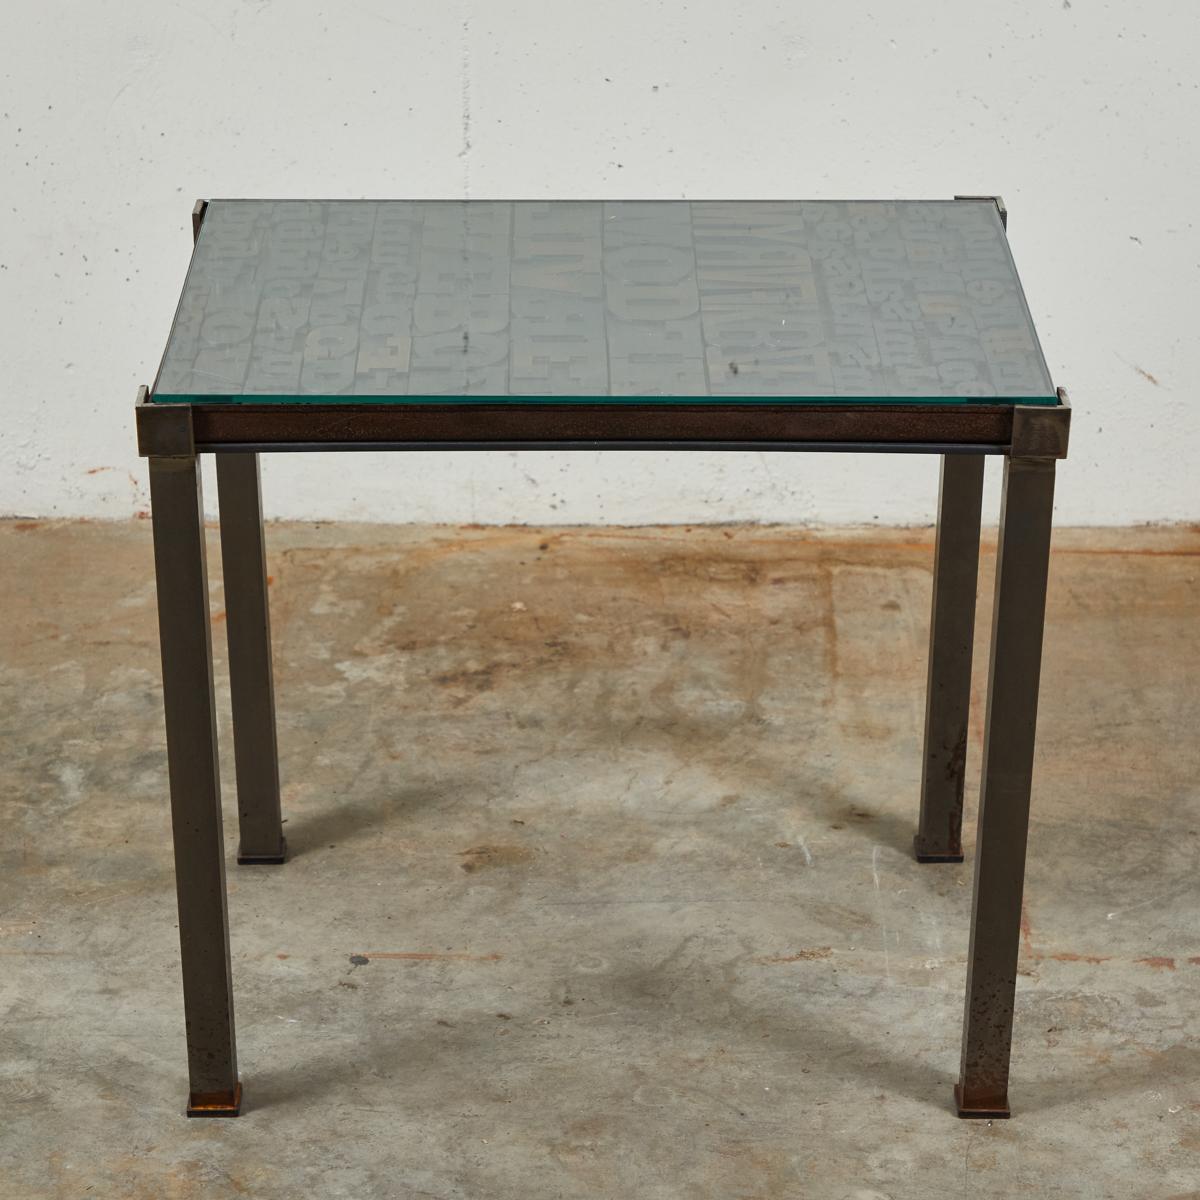 Late 19th Century Industrial Typeset Metal Table For Sale 1